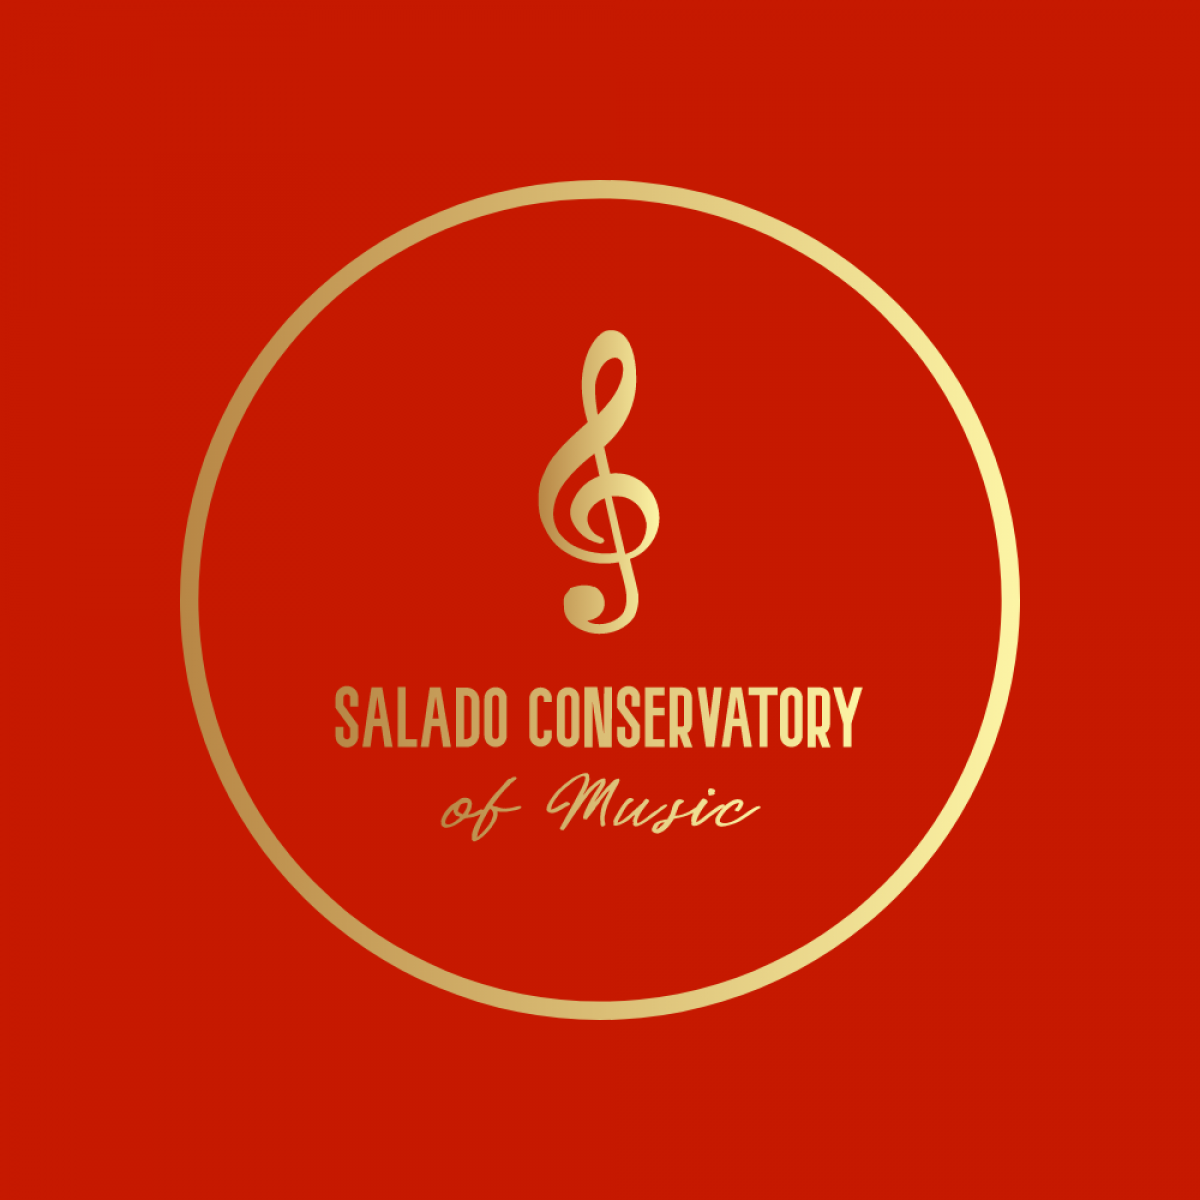 Picture of Salado Conservatory of Music logo